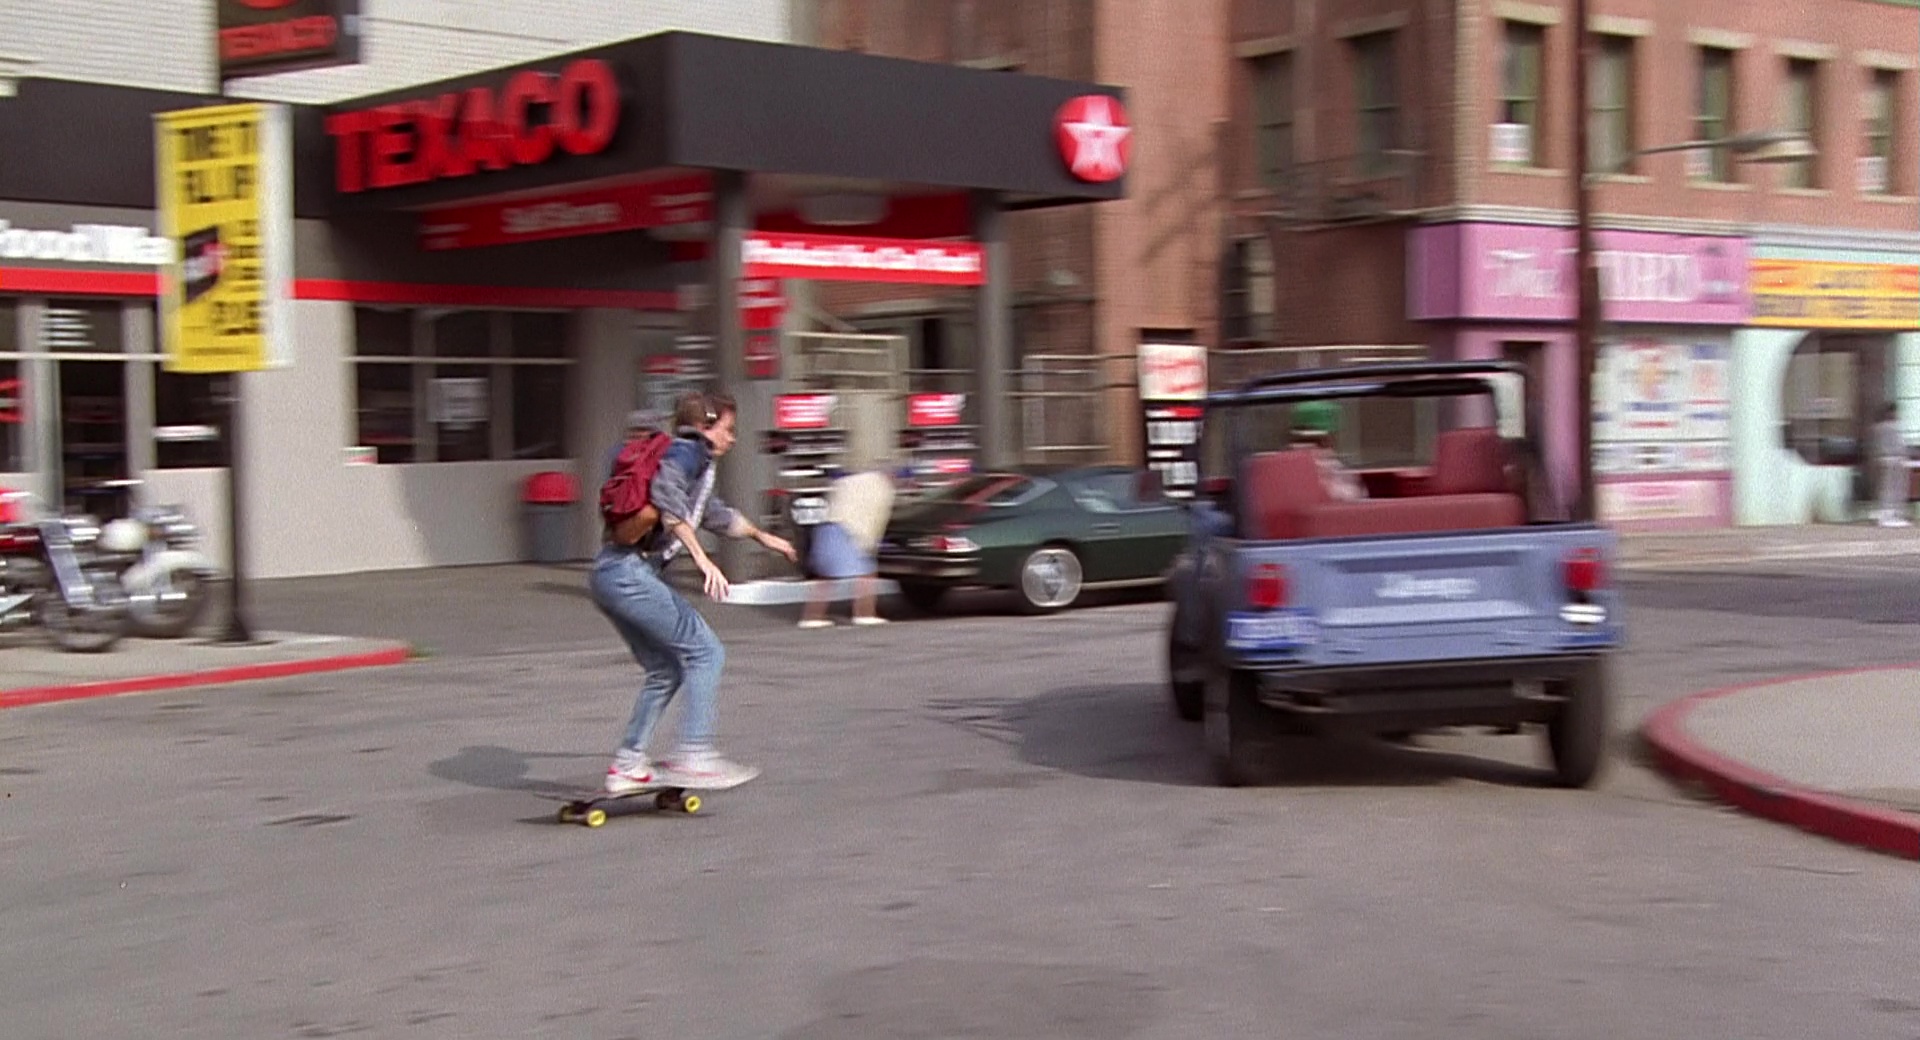 Texaco Gas Station In Back To The Future (1985)